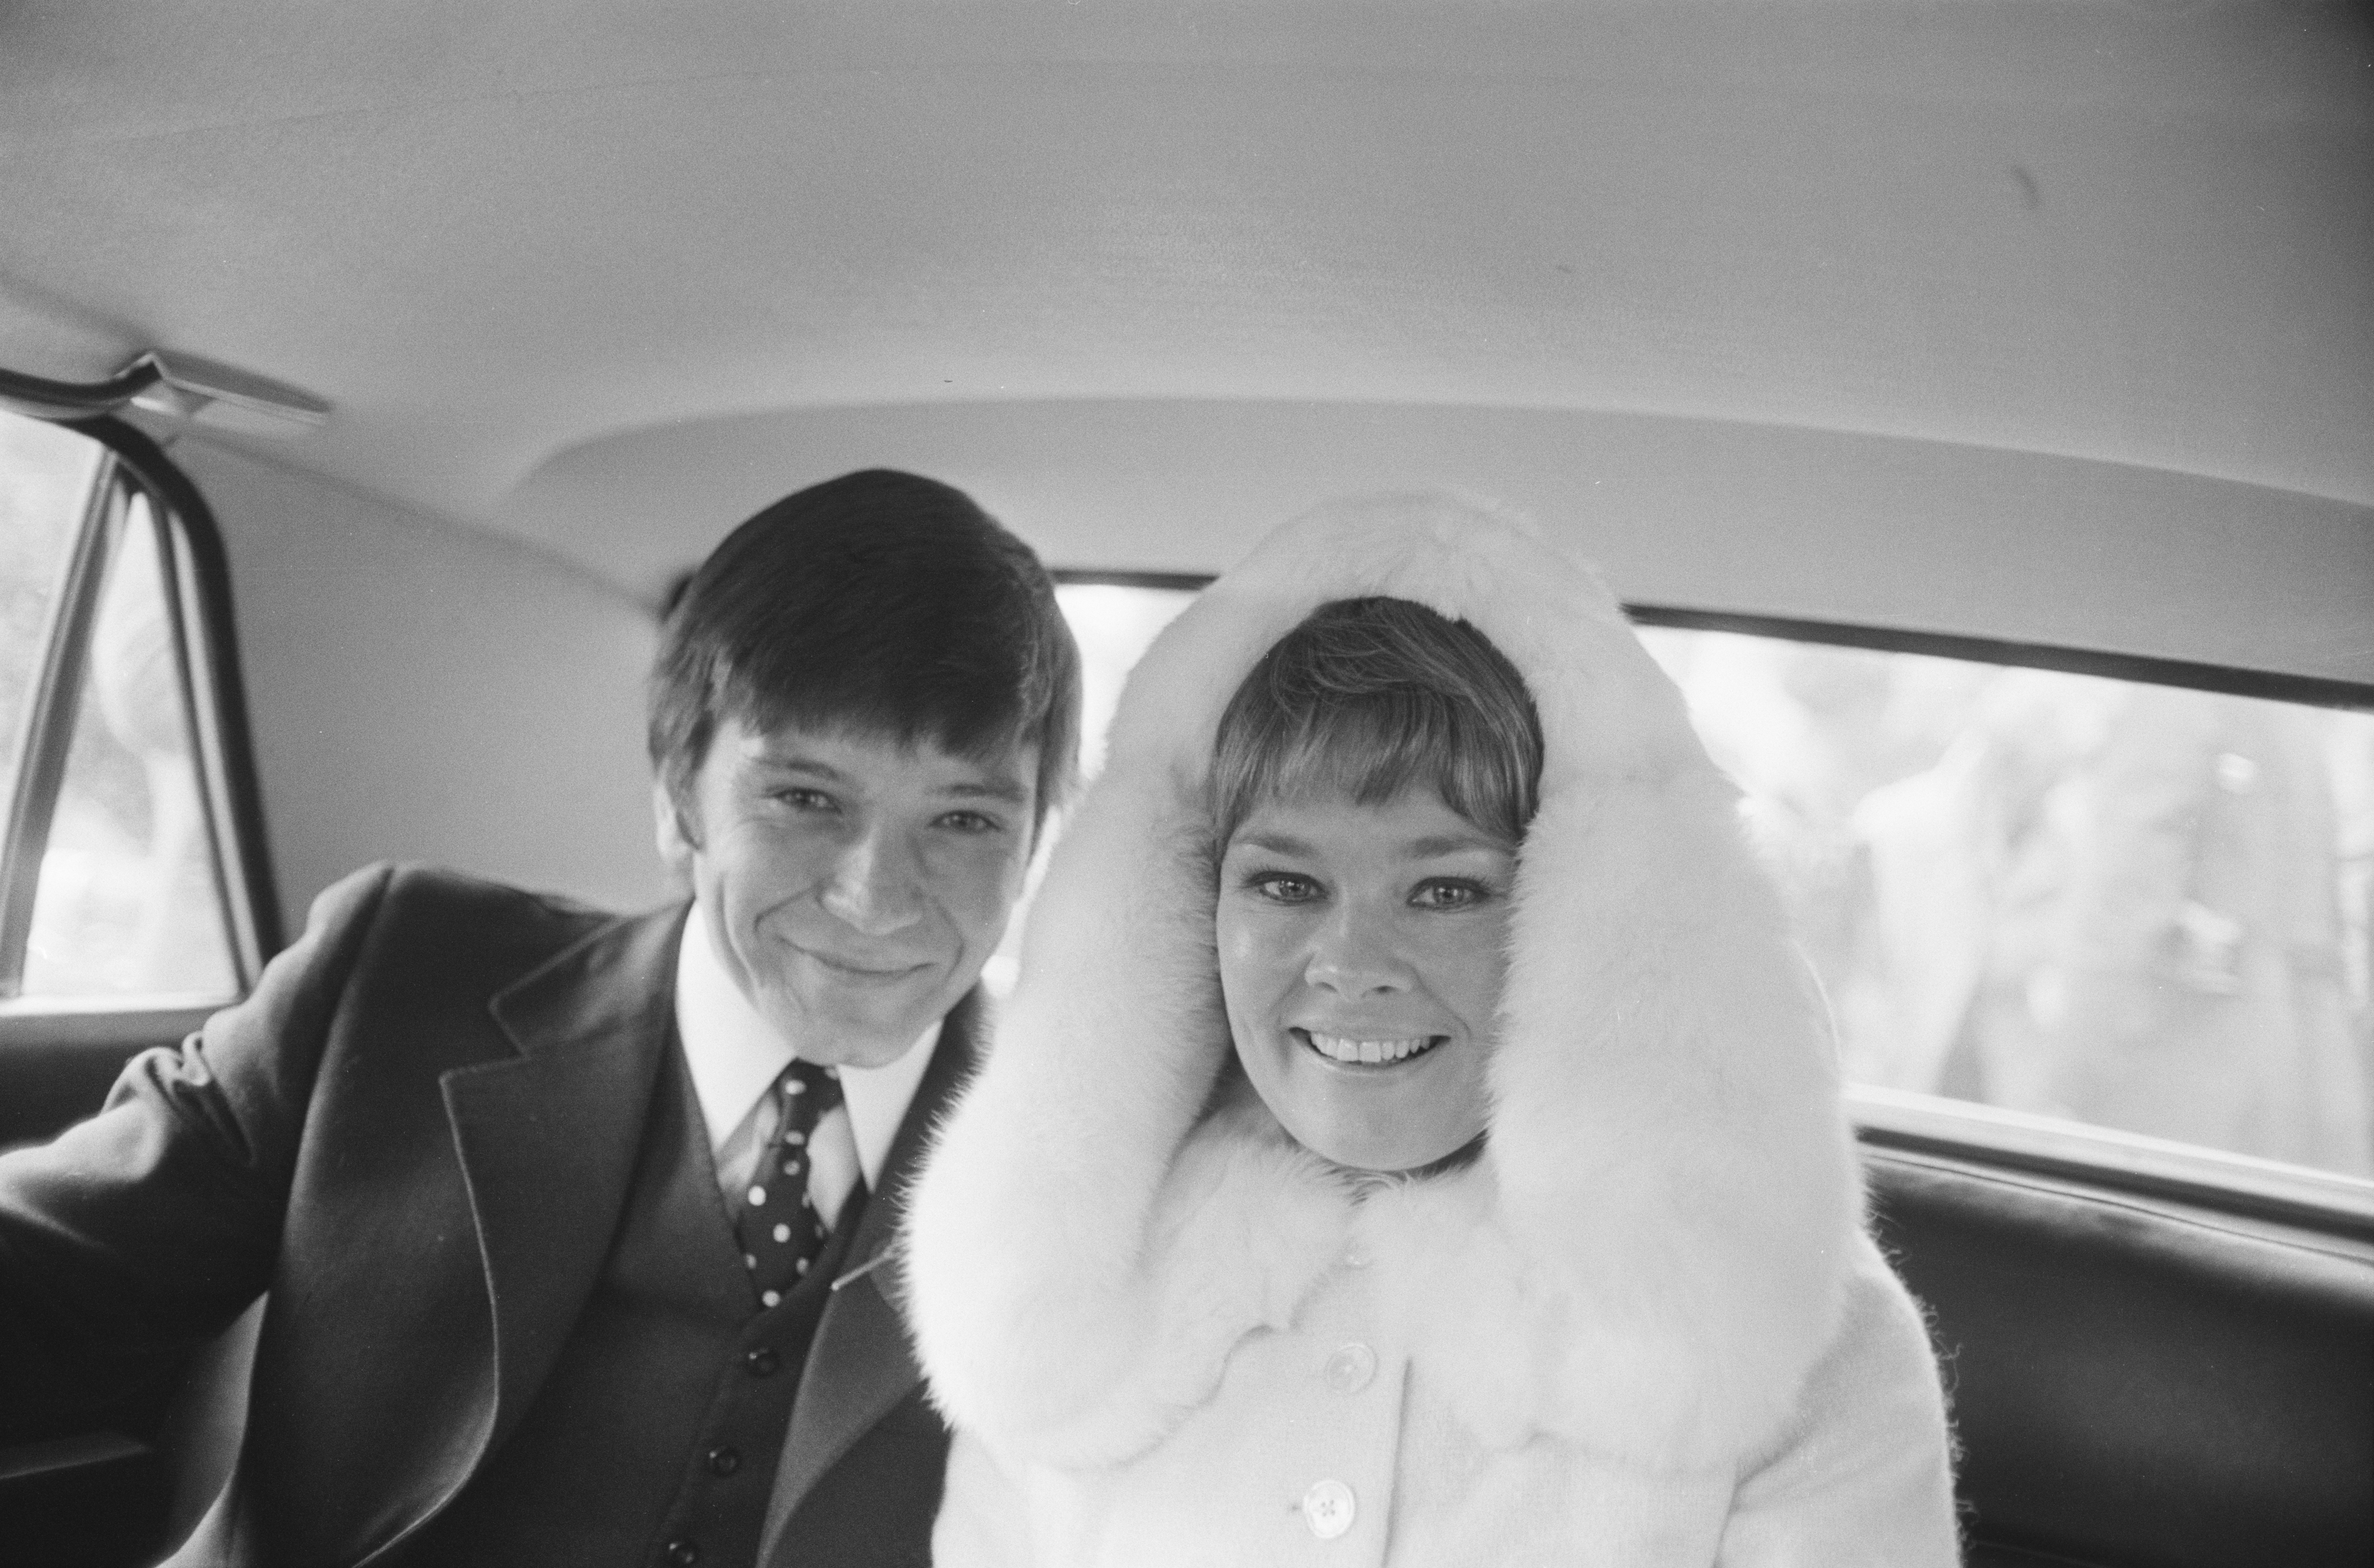 English actress Judi Dench marries actor Michael Williams (1935 - 2001) at St Mary's Church, Hampstead, London, 5th February 1971. | Source: Getty Images